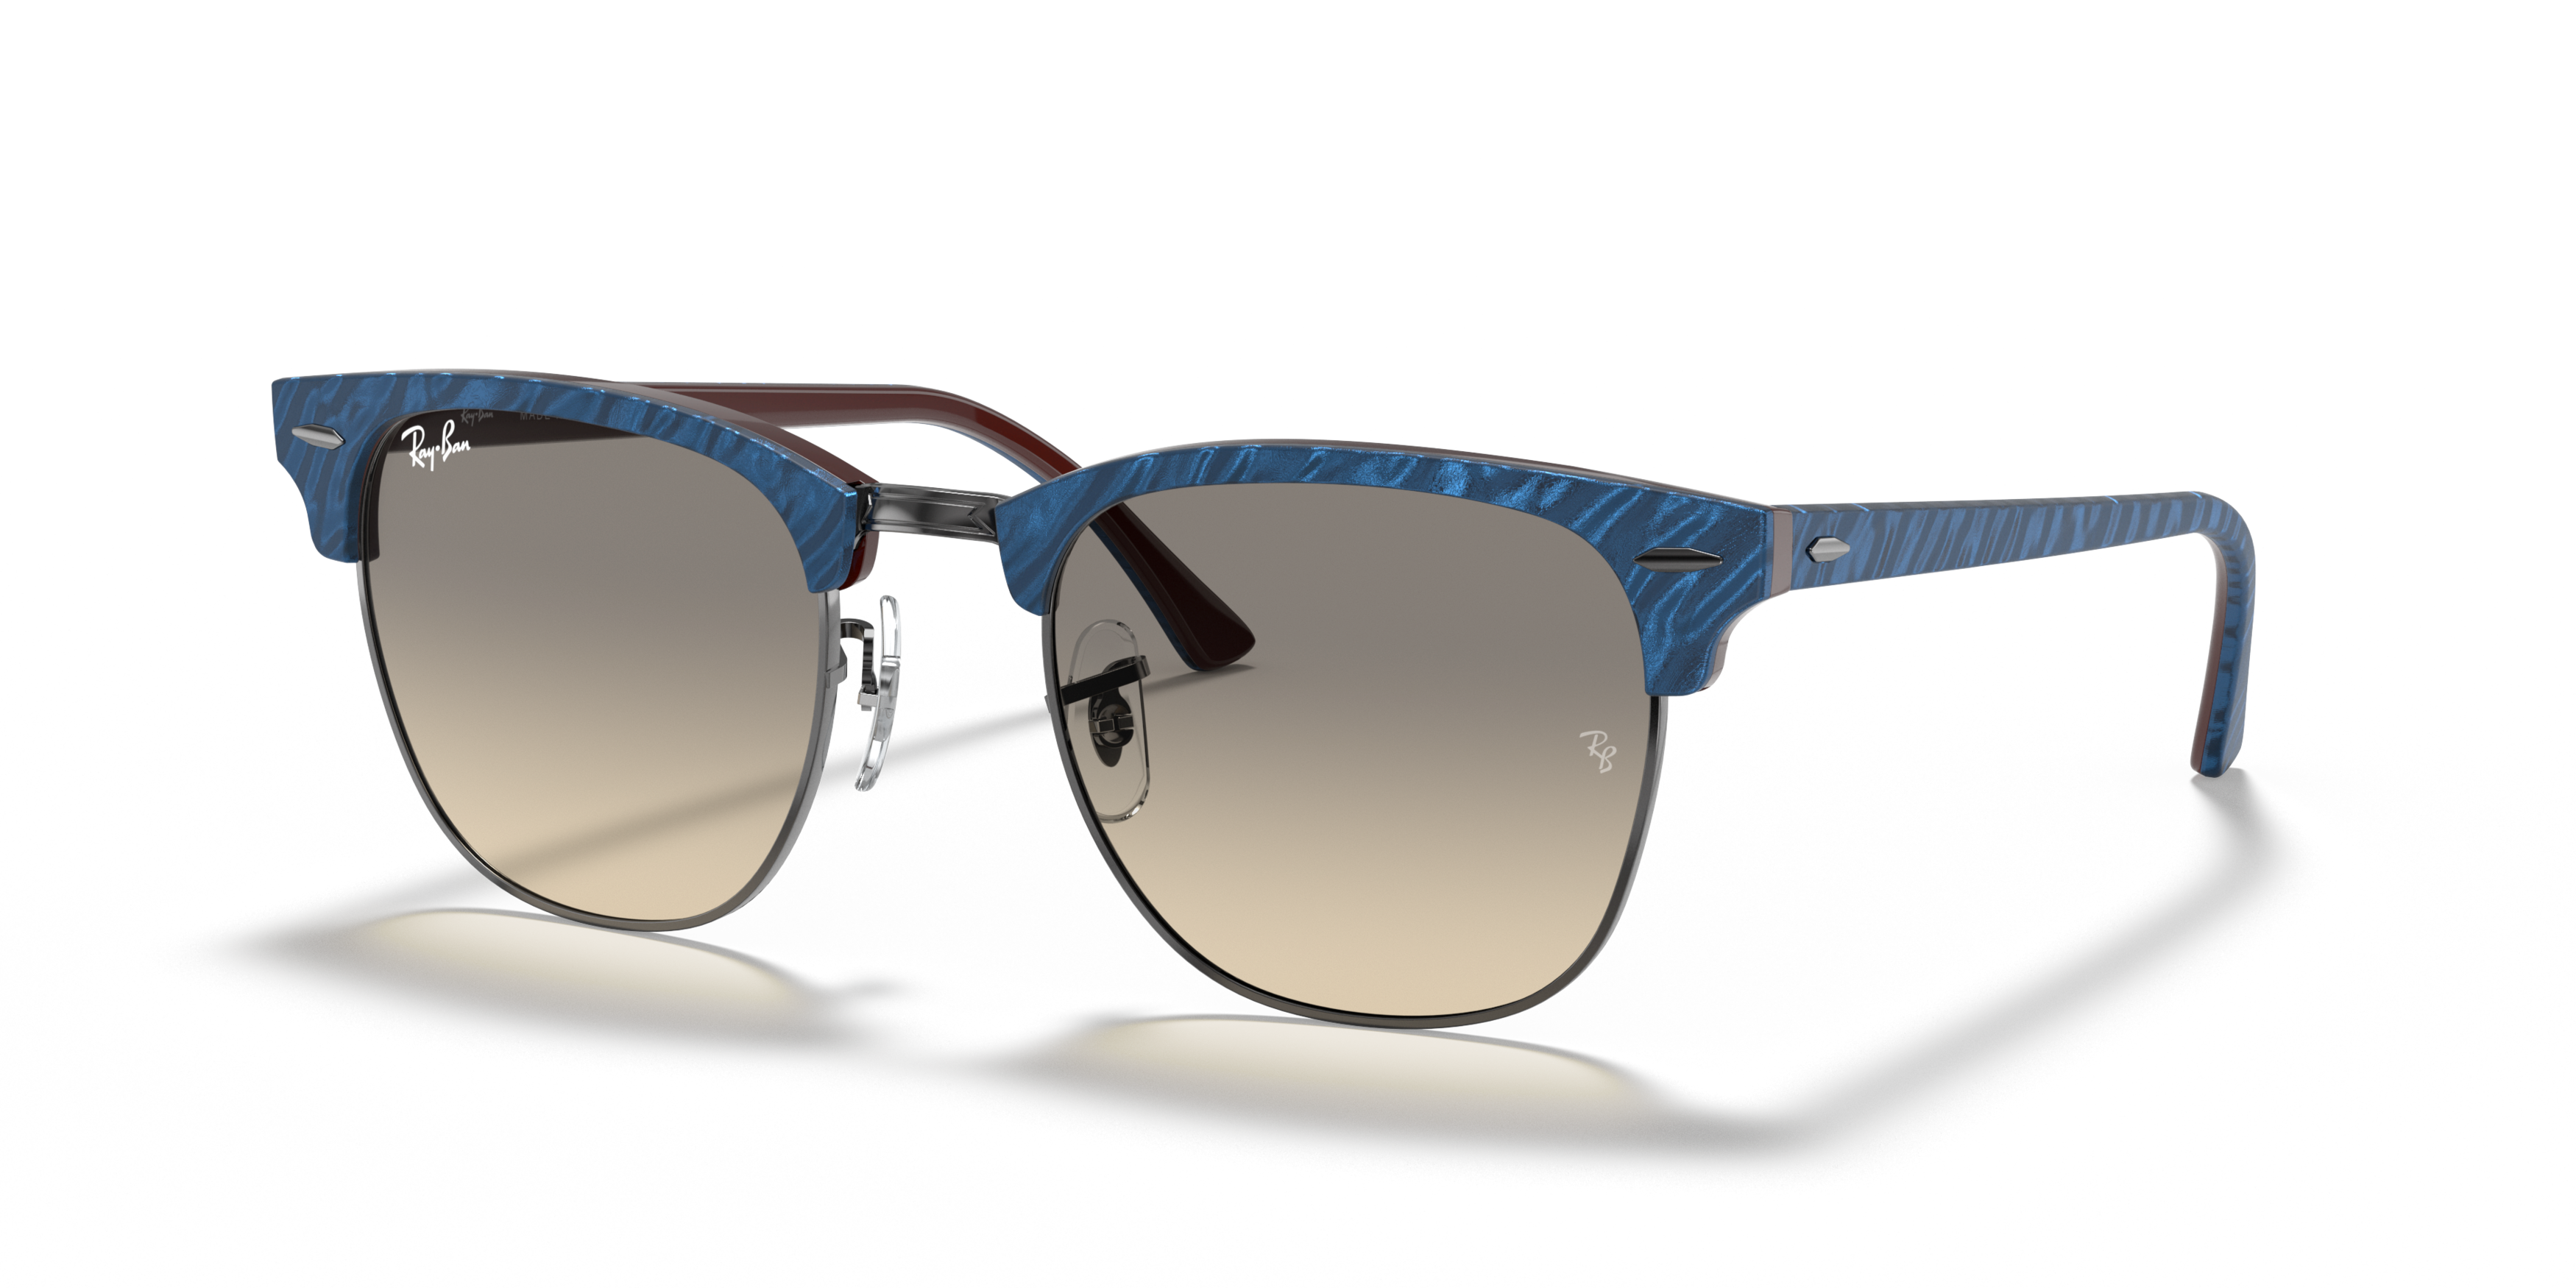 Angle_Left01 Ray-Ban Clubmaster Classic RB3016 131032 Grijs / Blauw, Bruin